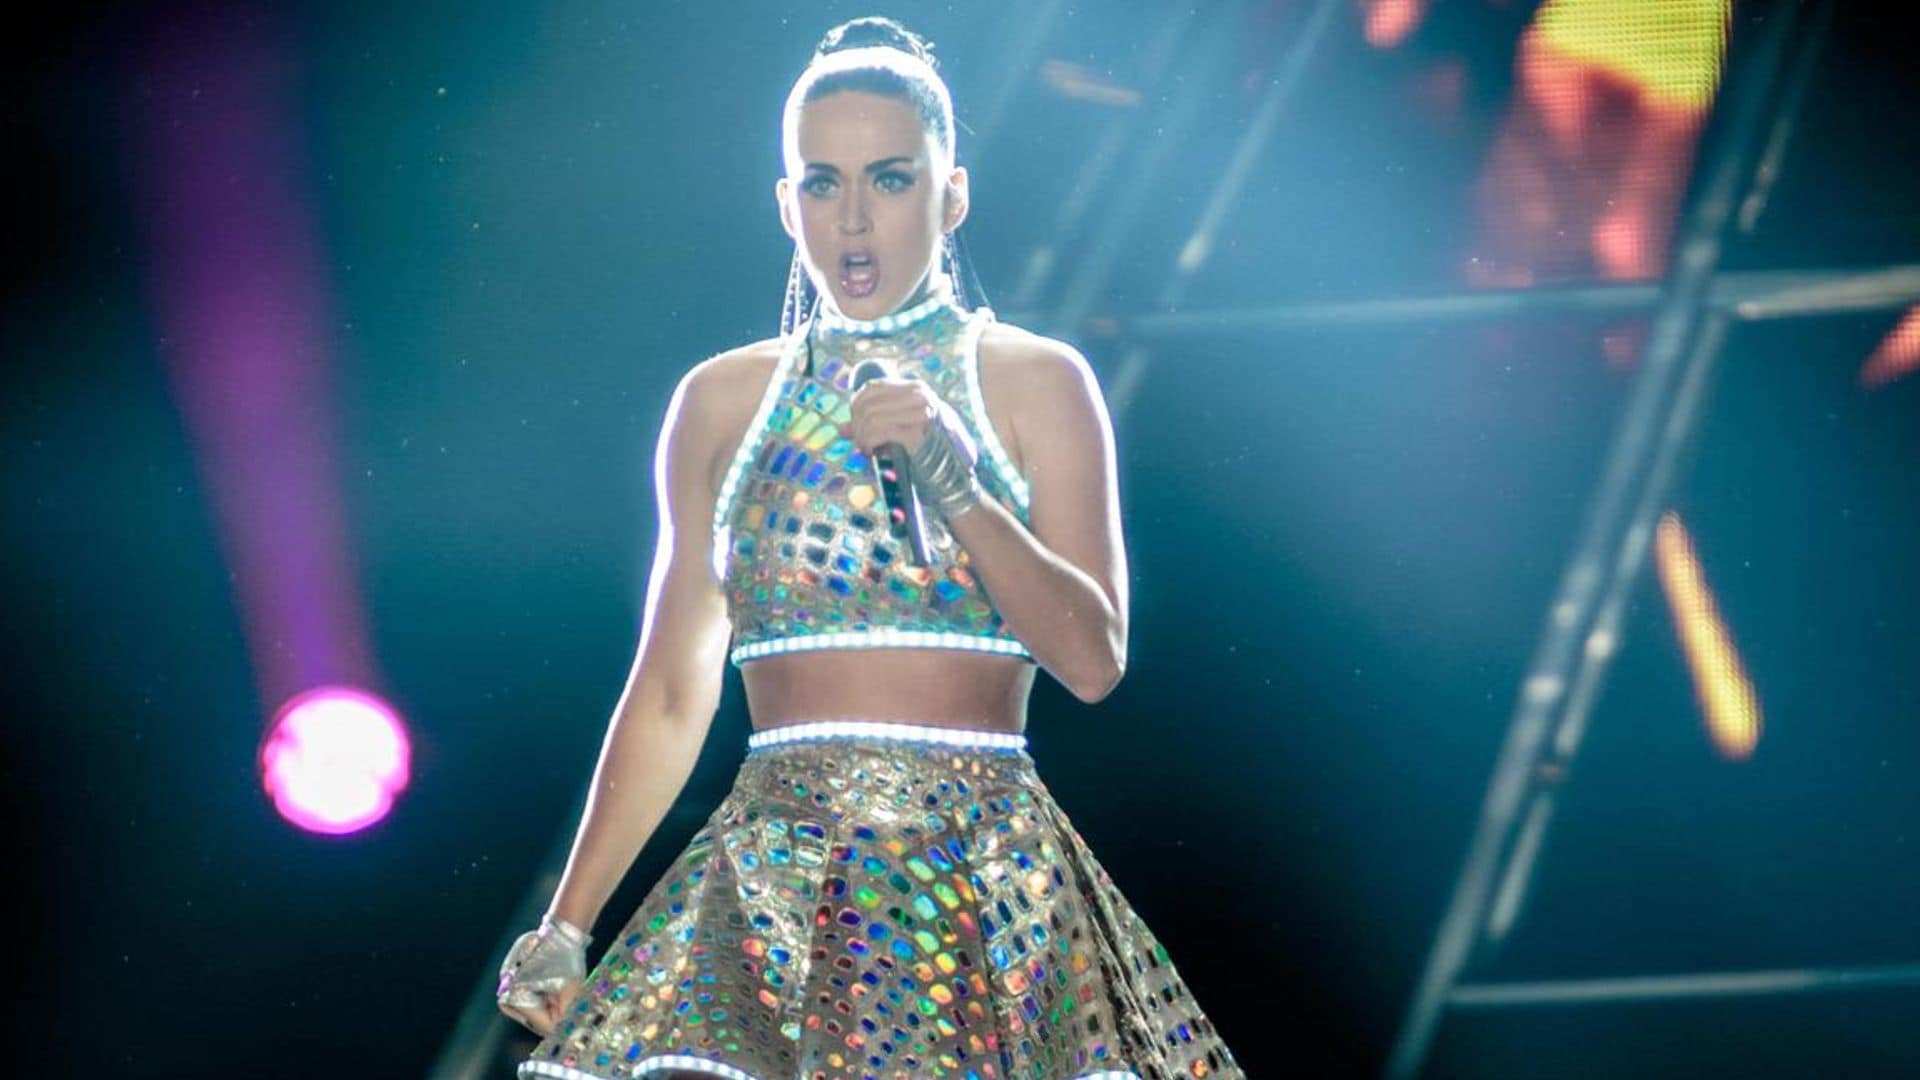 Katy Perry revealed being pregnant has altered her powerful vocals